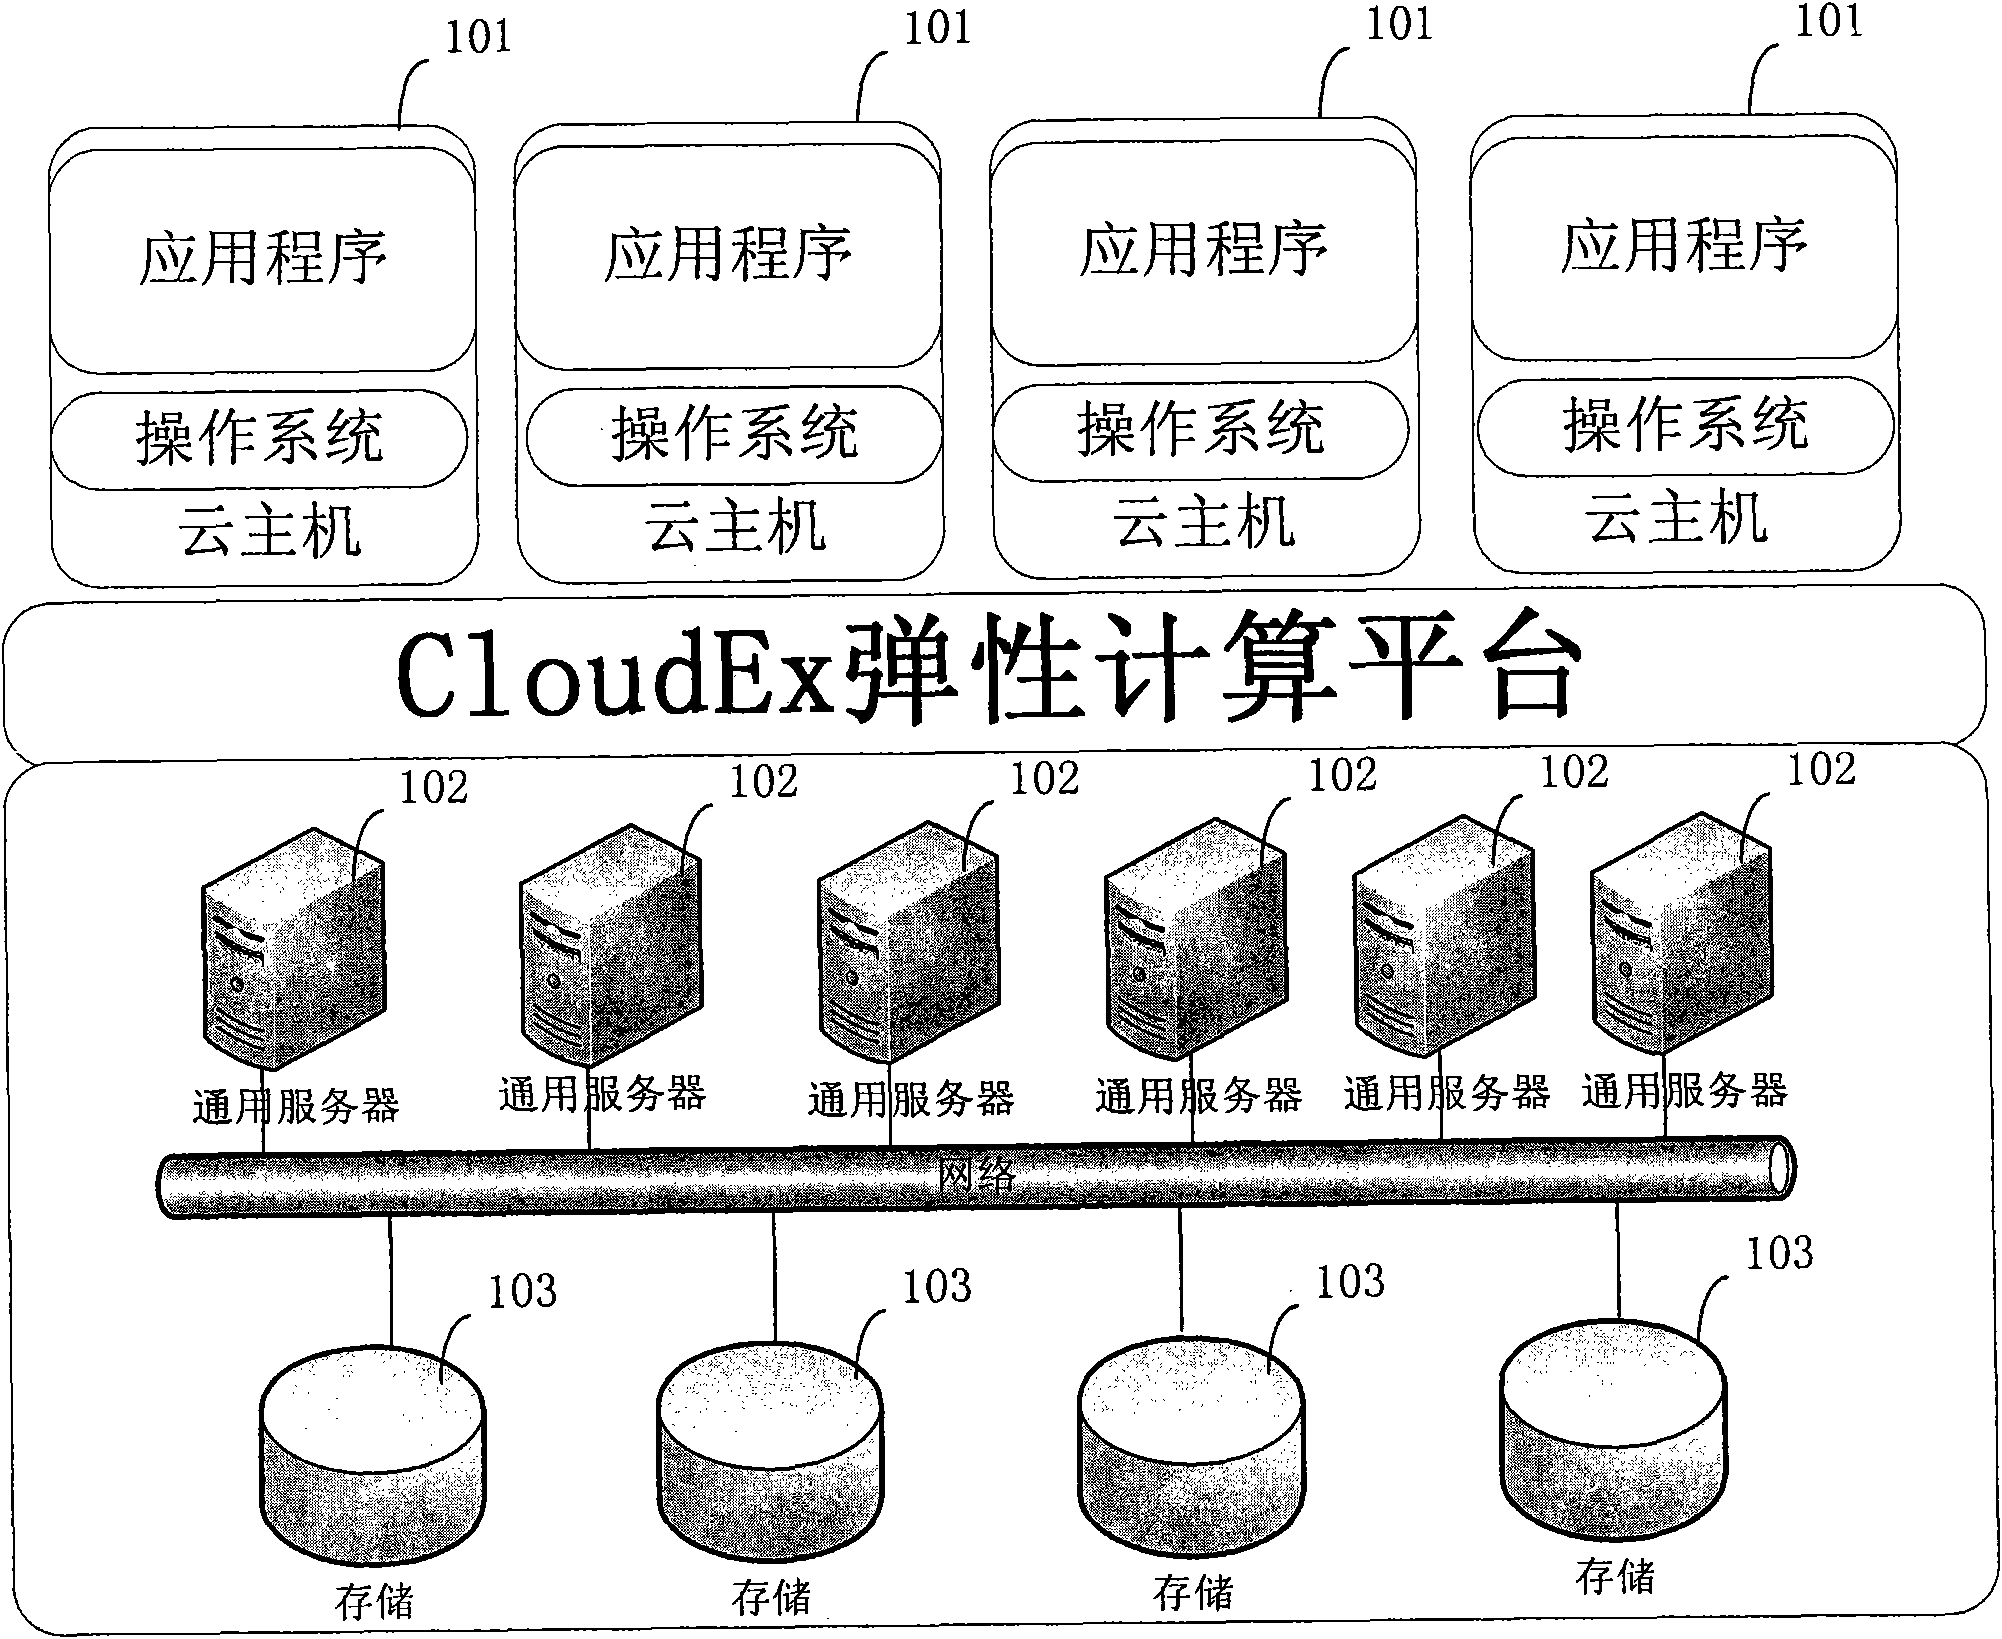 Virtual local area network-based speed limiting method and system for cloud hosts